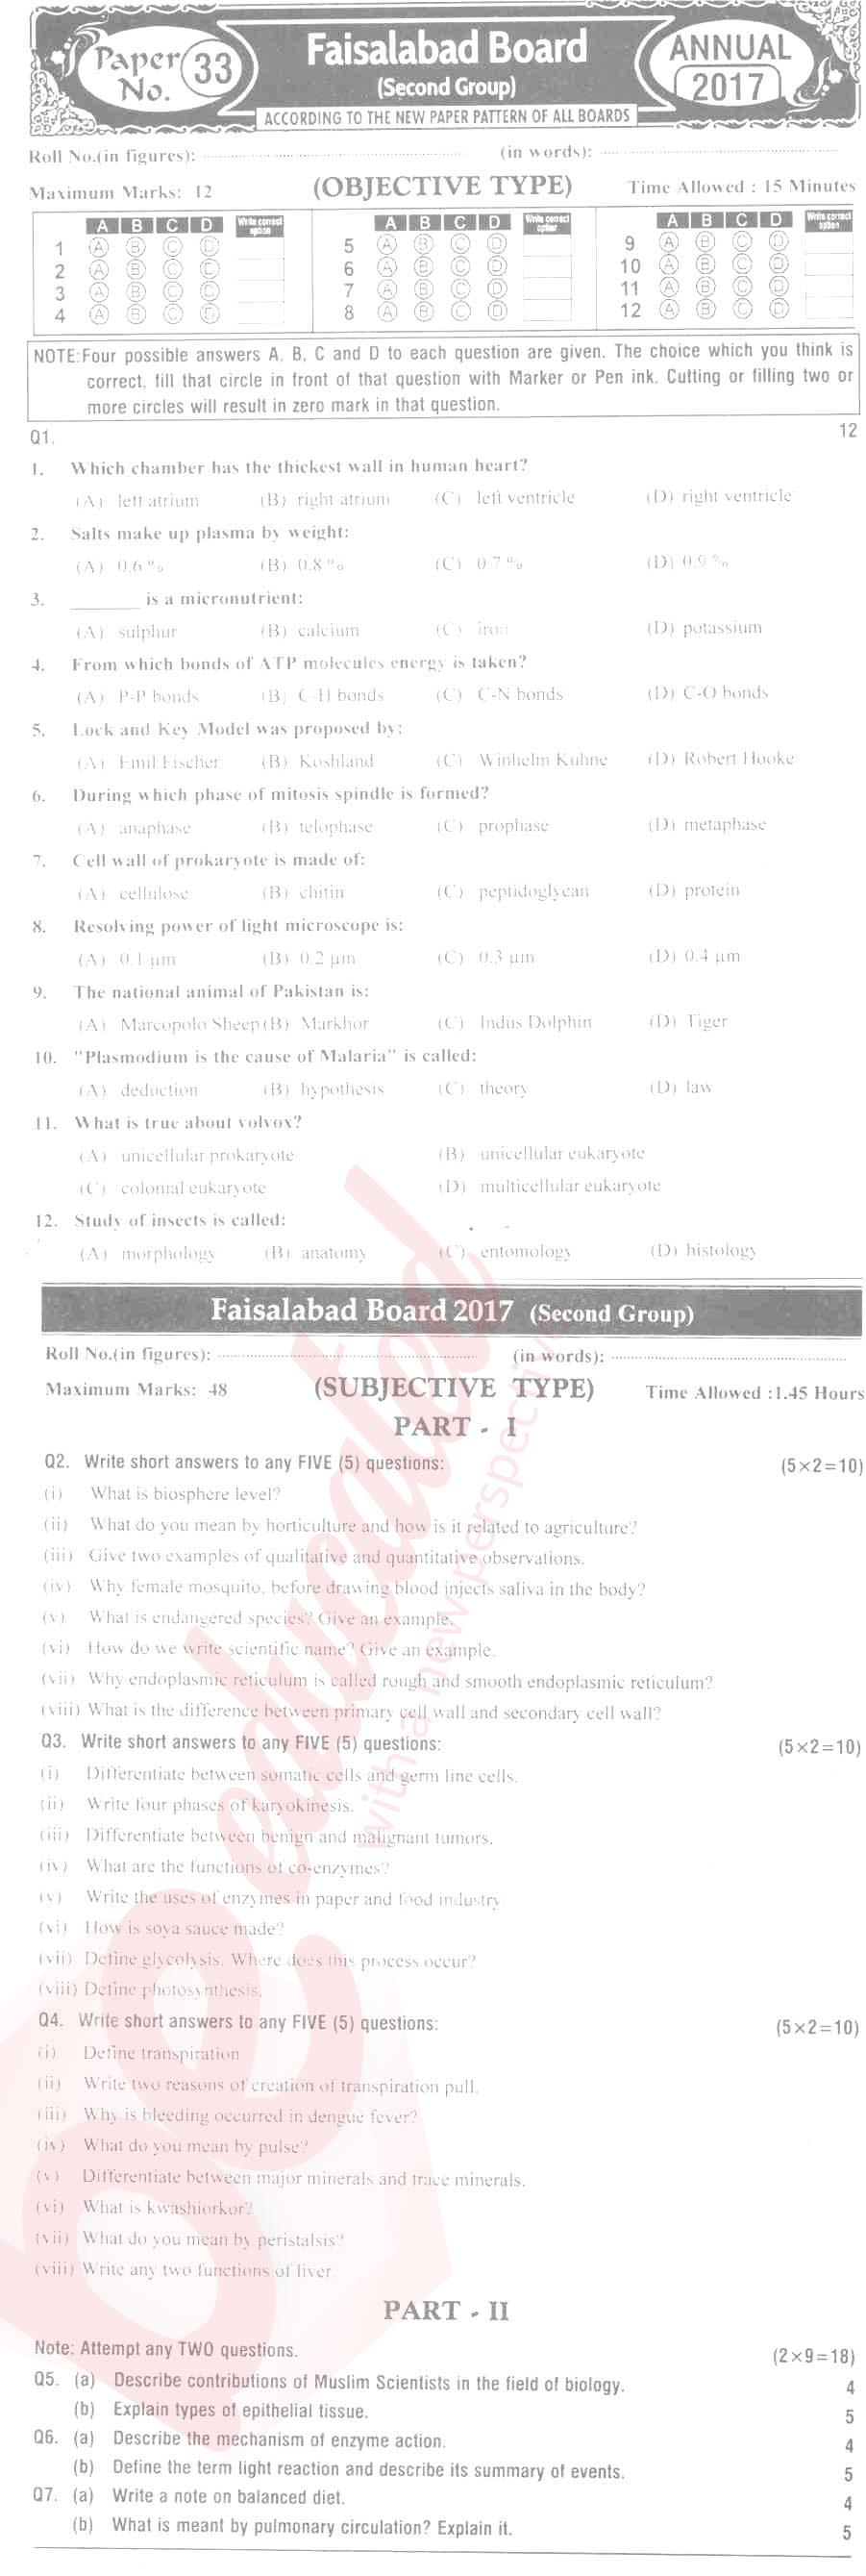 Biology 9th class Past Paper Group 2 BISE Faisalabad 2017